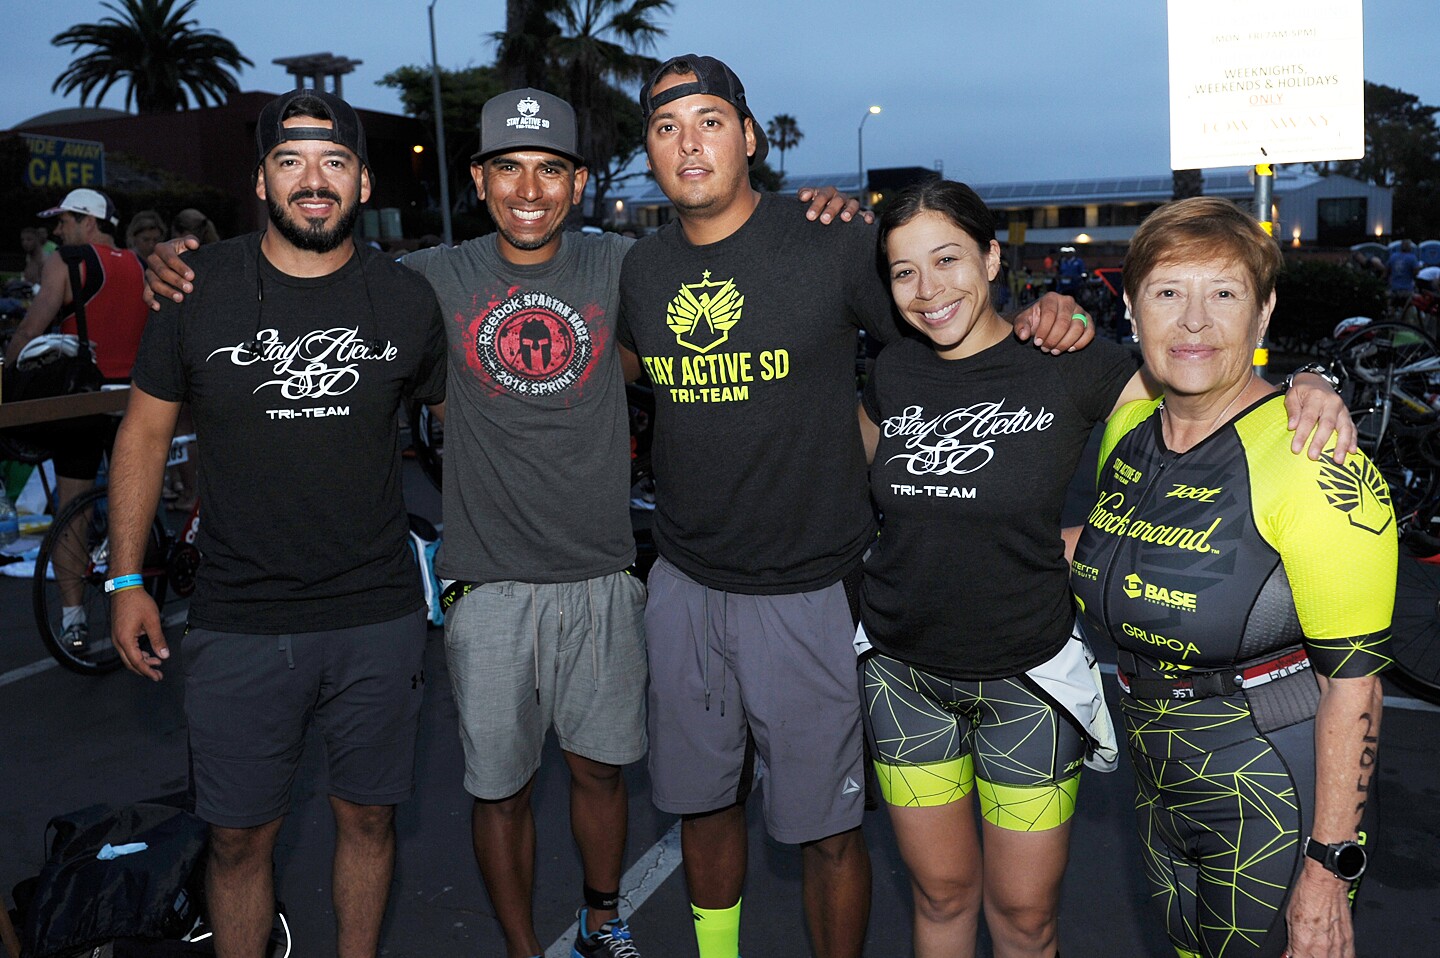 Weekend warriors showed what they're made of at the Solana Beach Triathlon & Duathlon on Sunday, July 28, 2019.